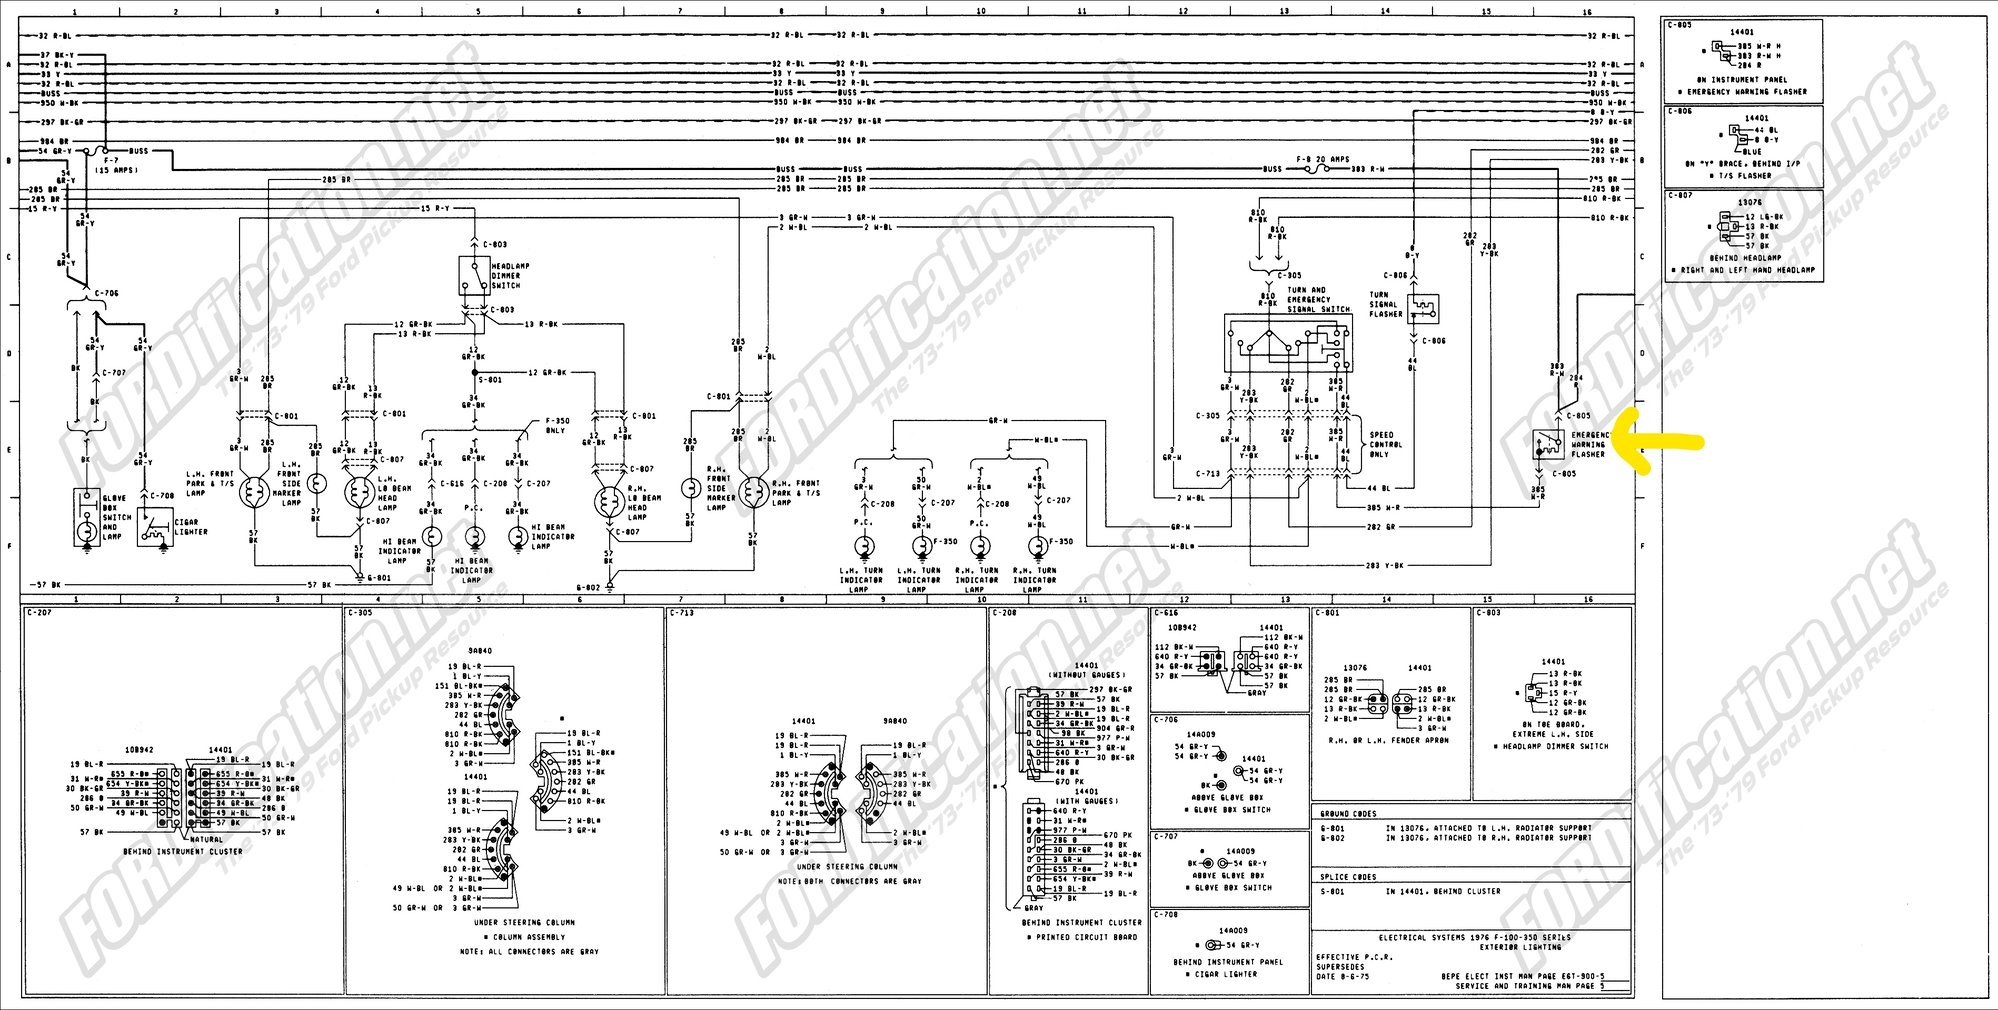 1976 F350 Ignition Wiring Problem - Ford Truck Enthusiasts Forums  Ignition Wiring Diagram For 76 Ford F250    Ford Truck Enthusiasts